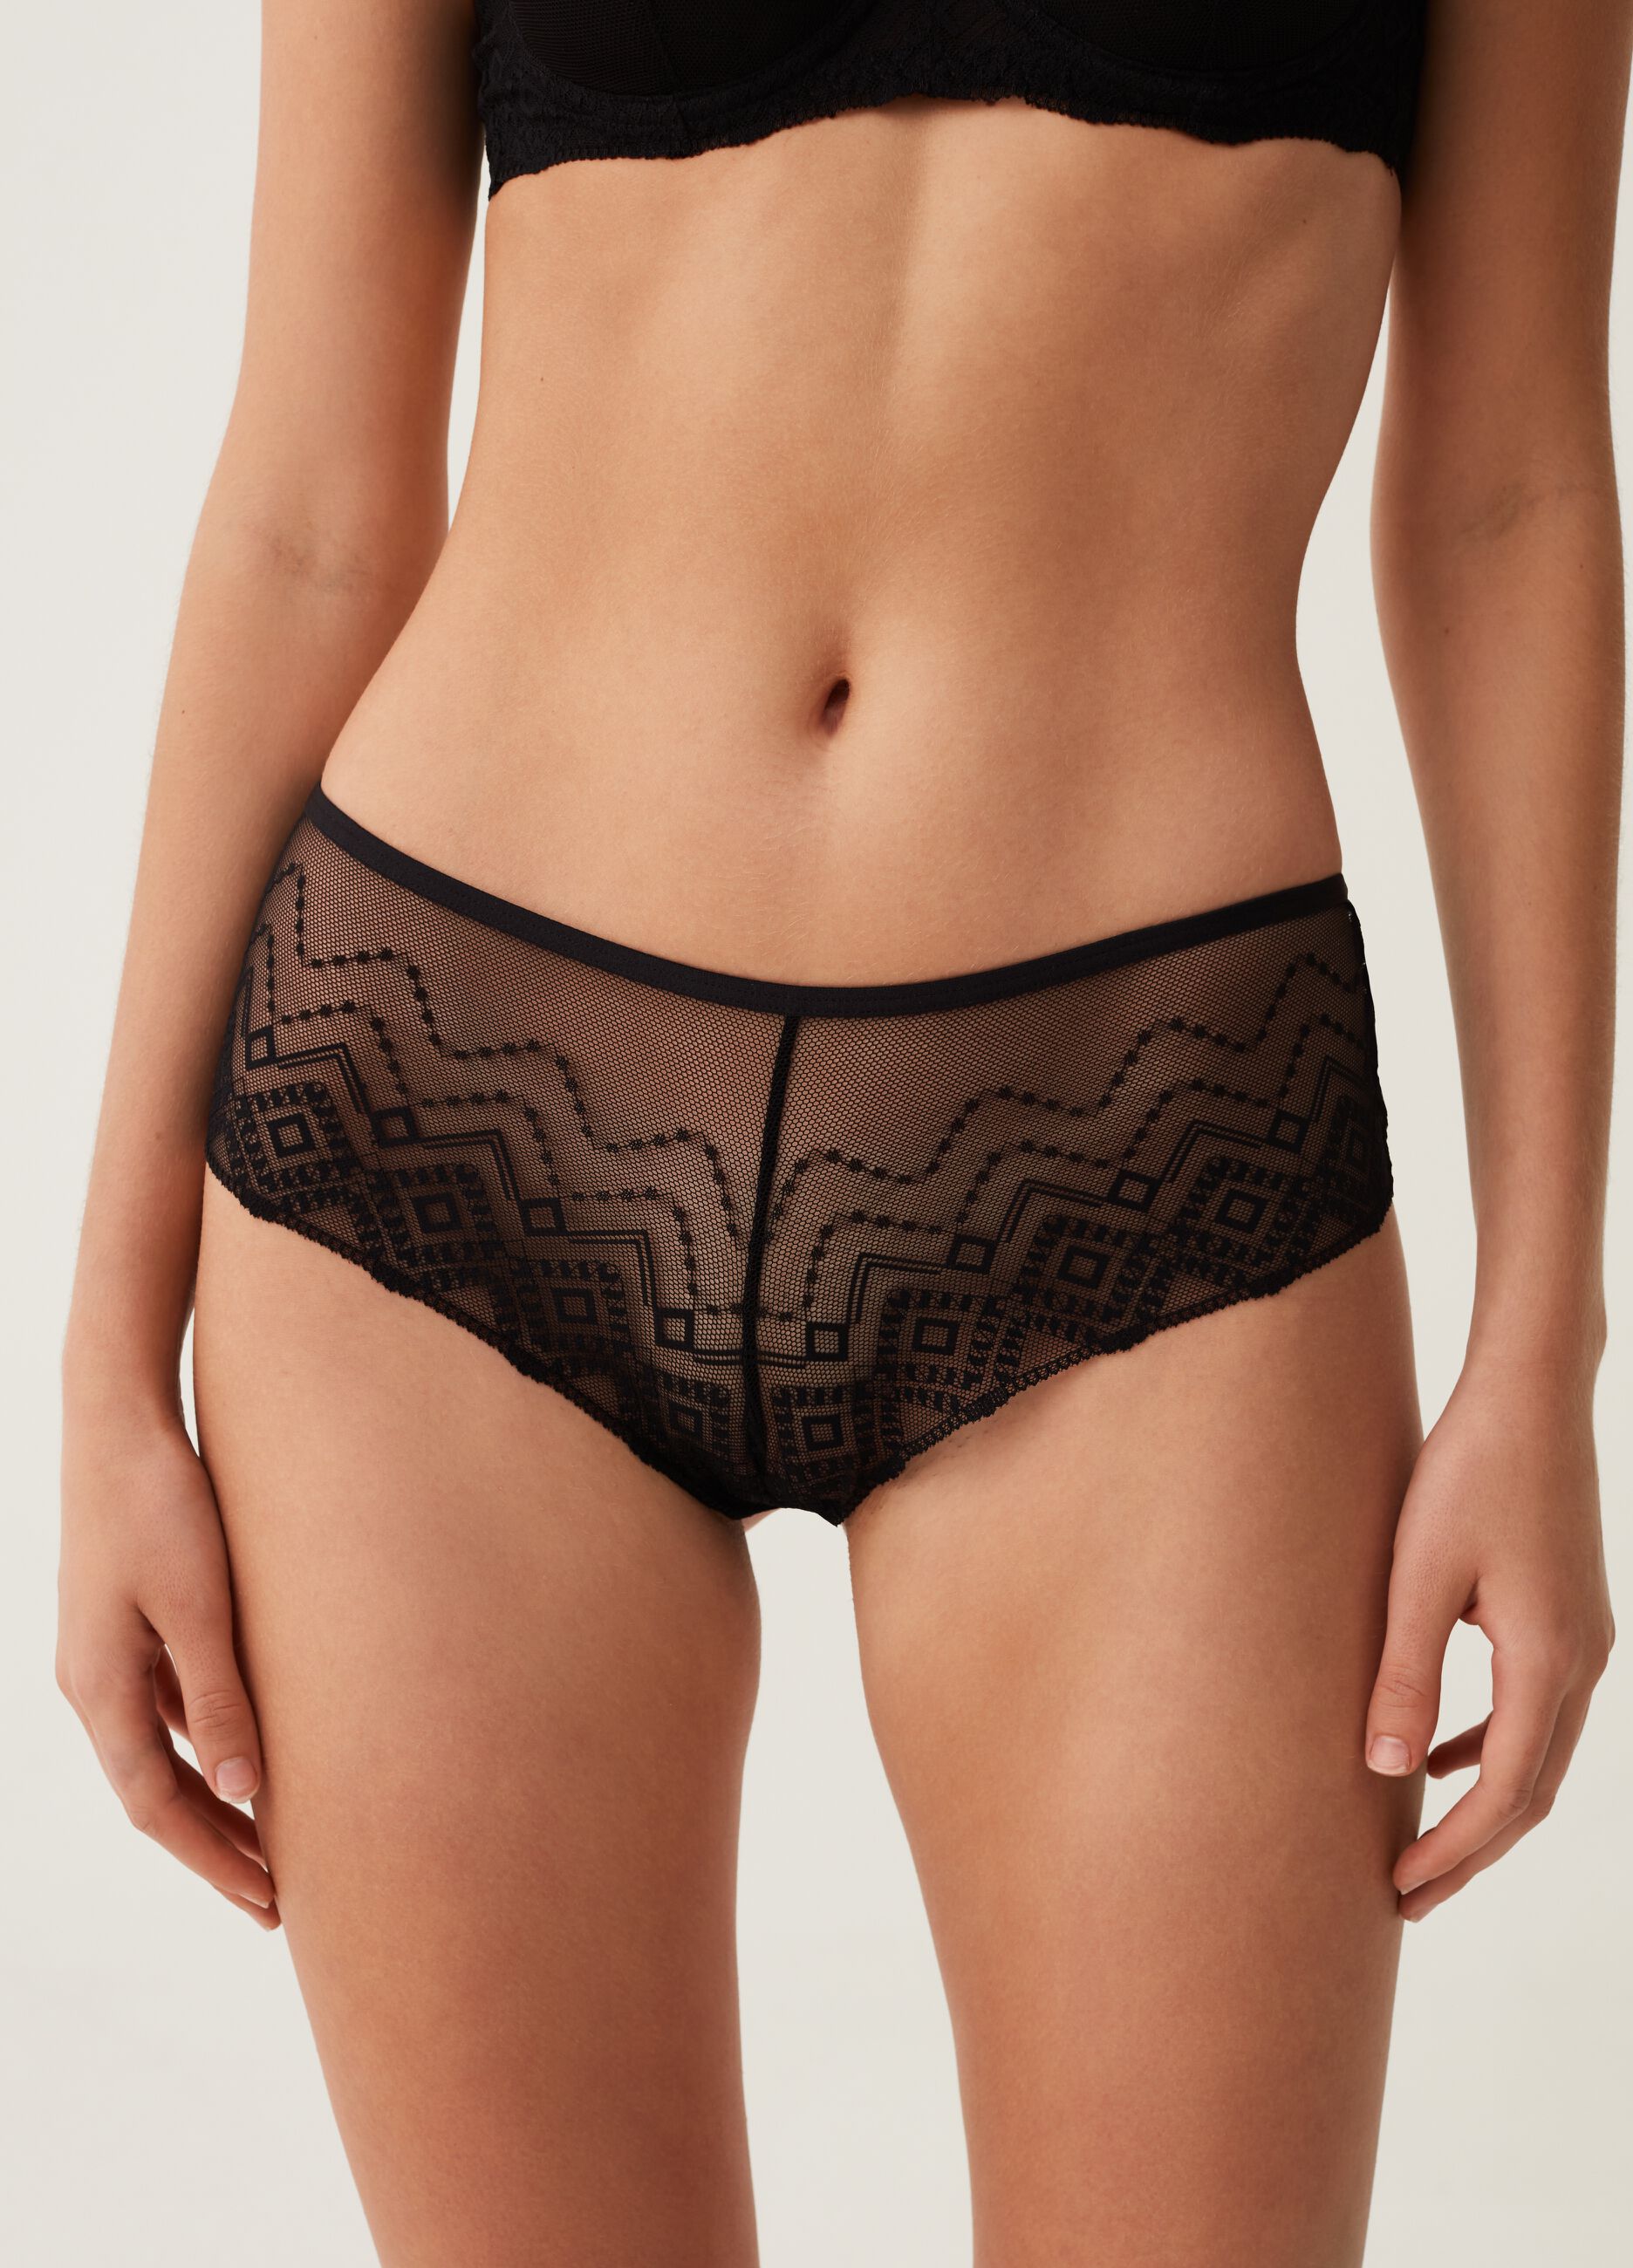 Woman's Black Lace French knickers with geometric design